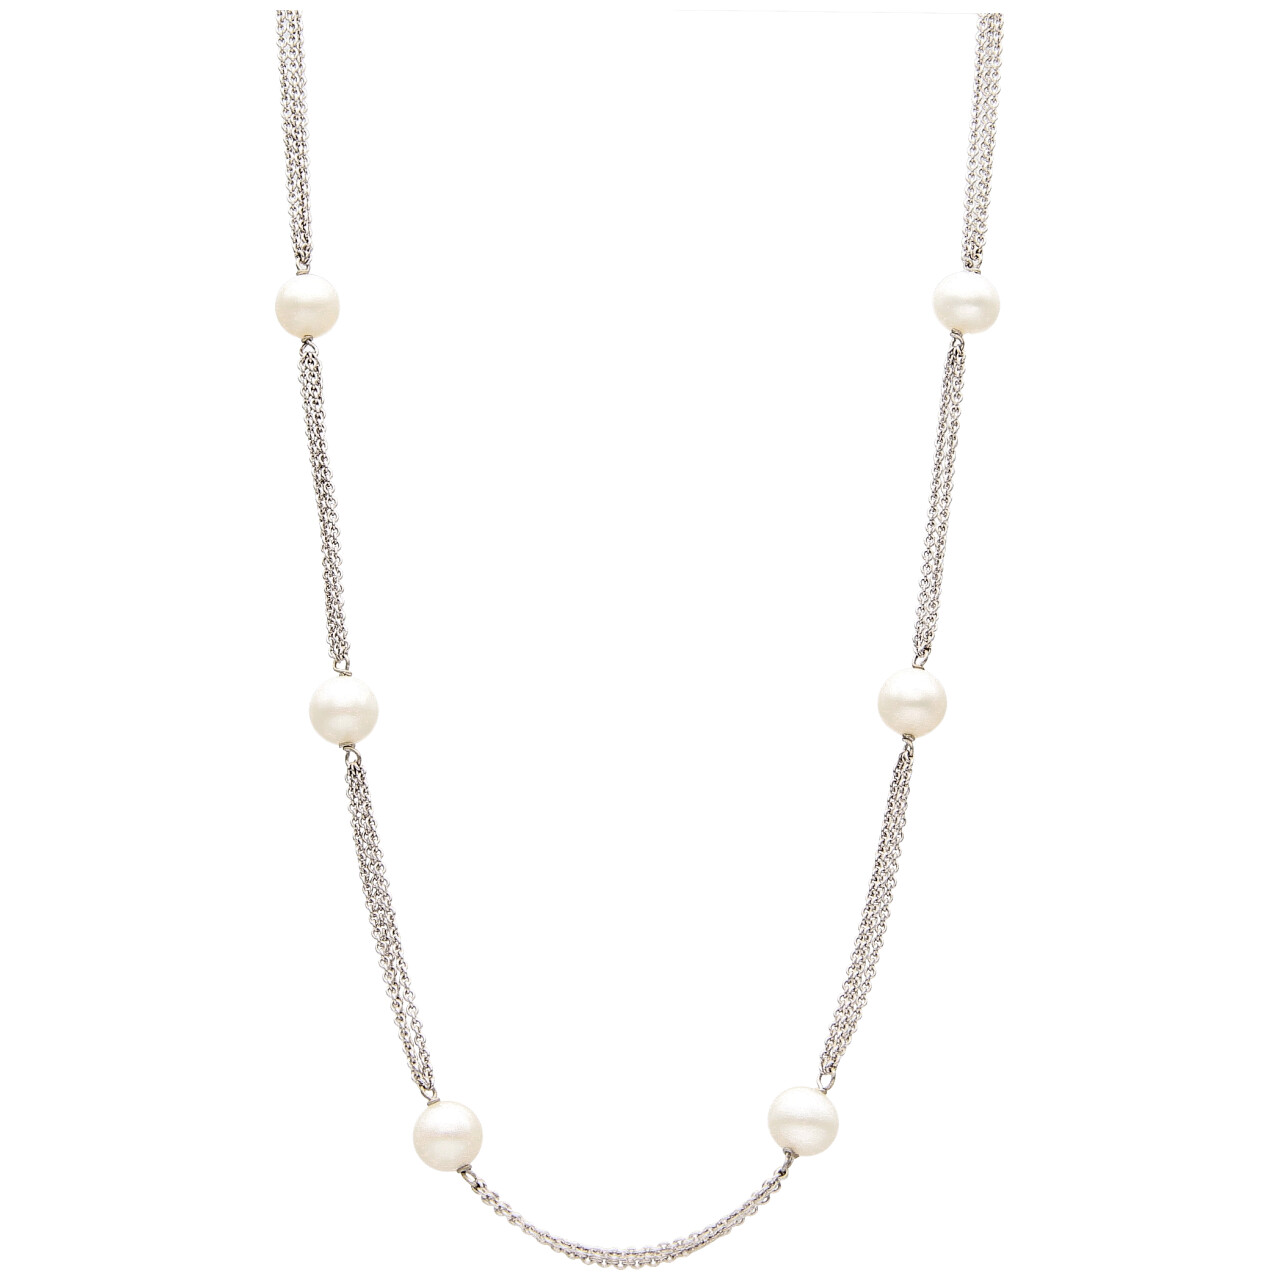 White gold necklace with pearls